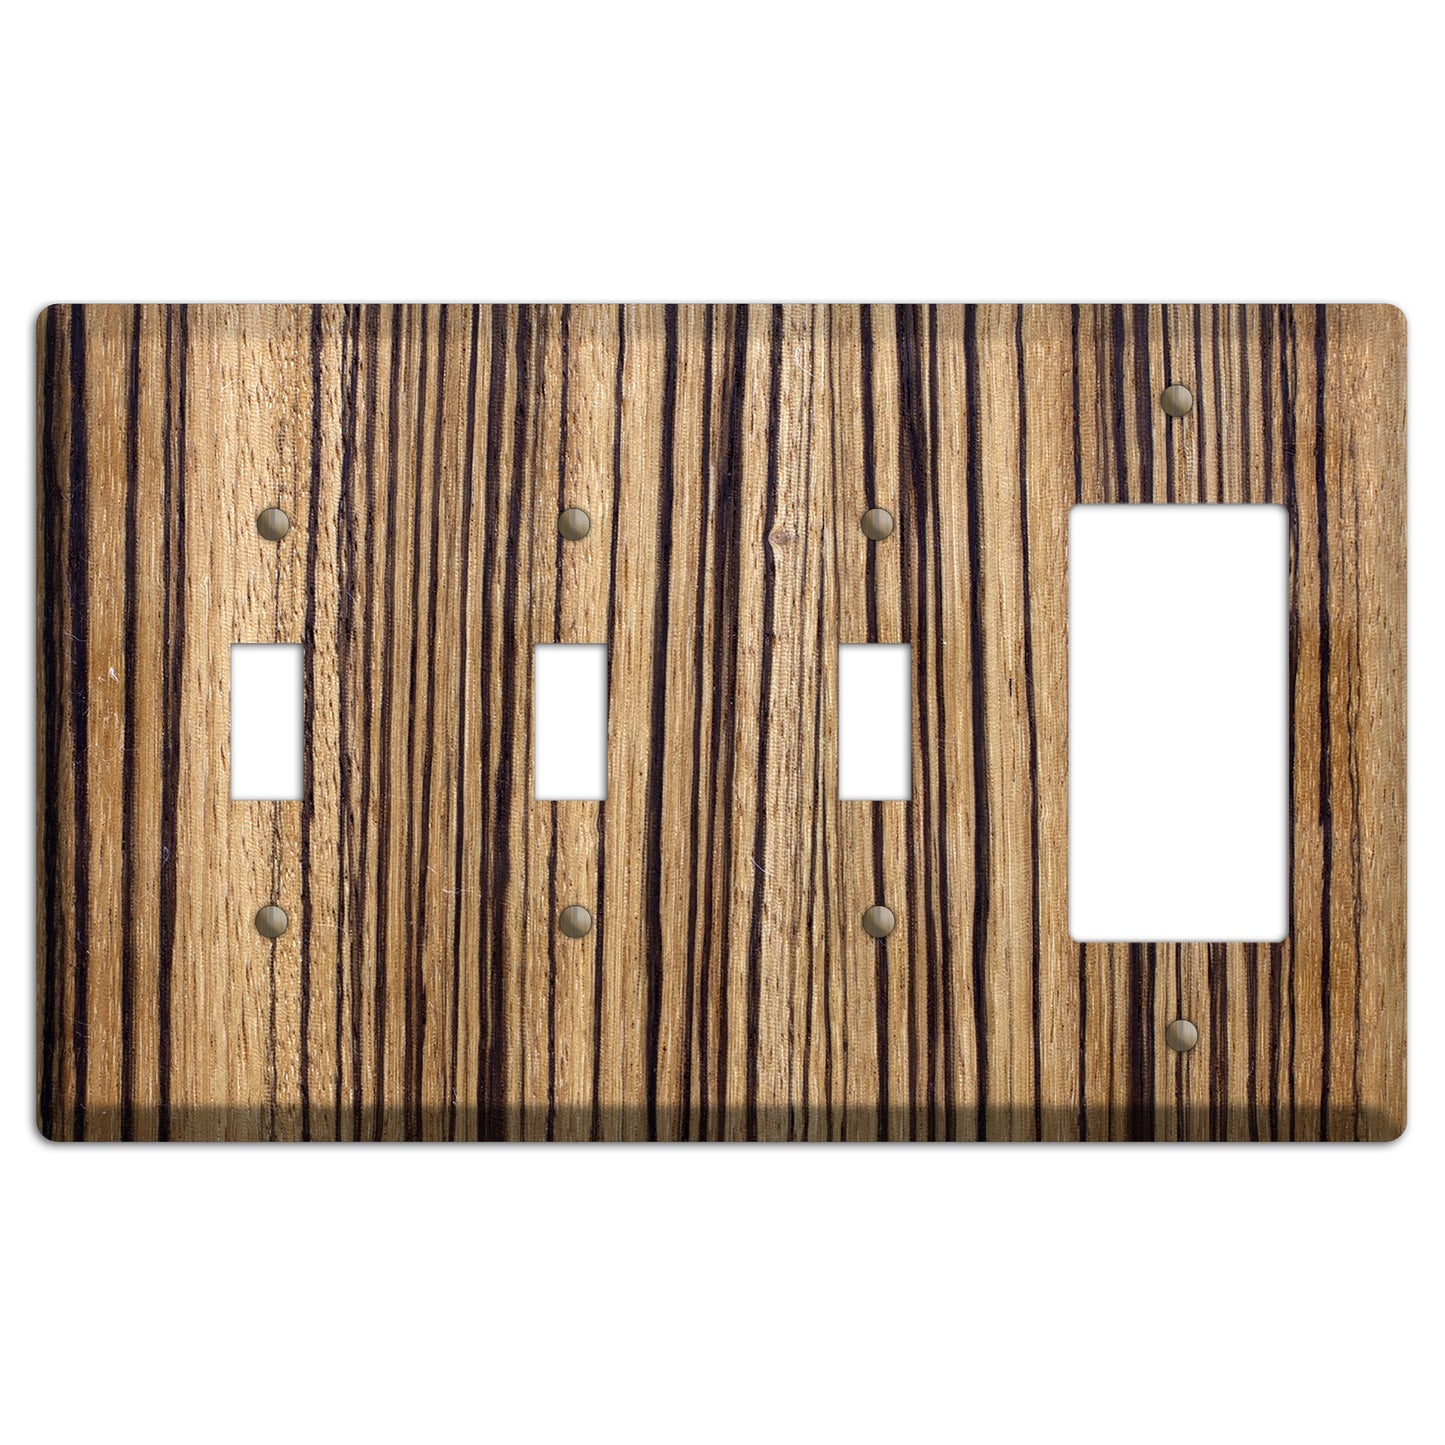 Zebrawood Wood 3 Toggle / Rocker Outlet Cover Plate